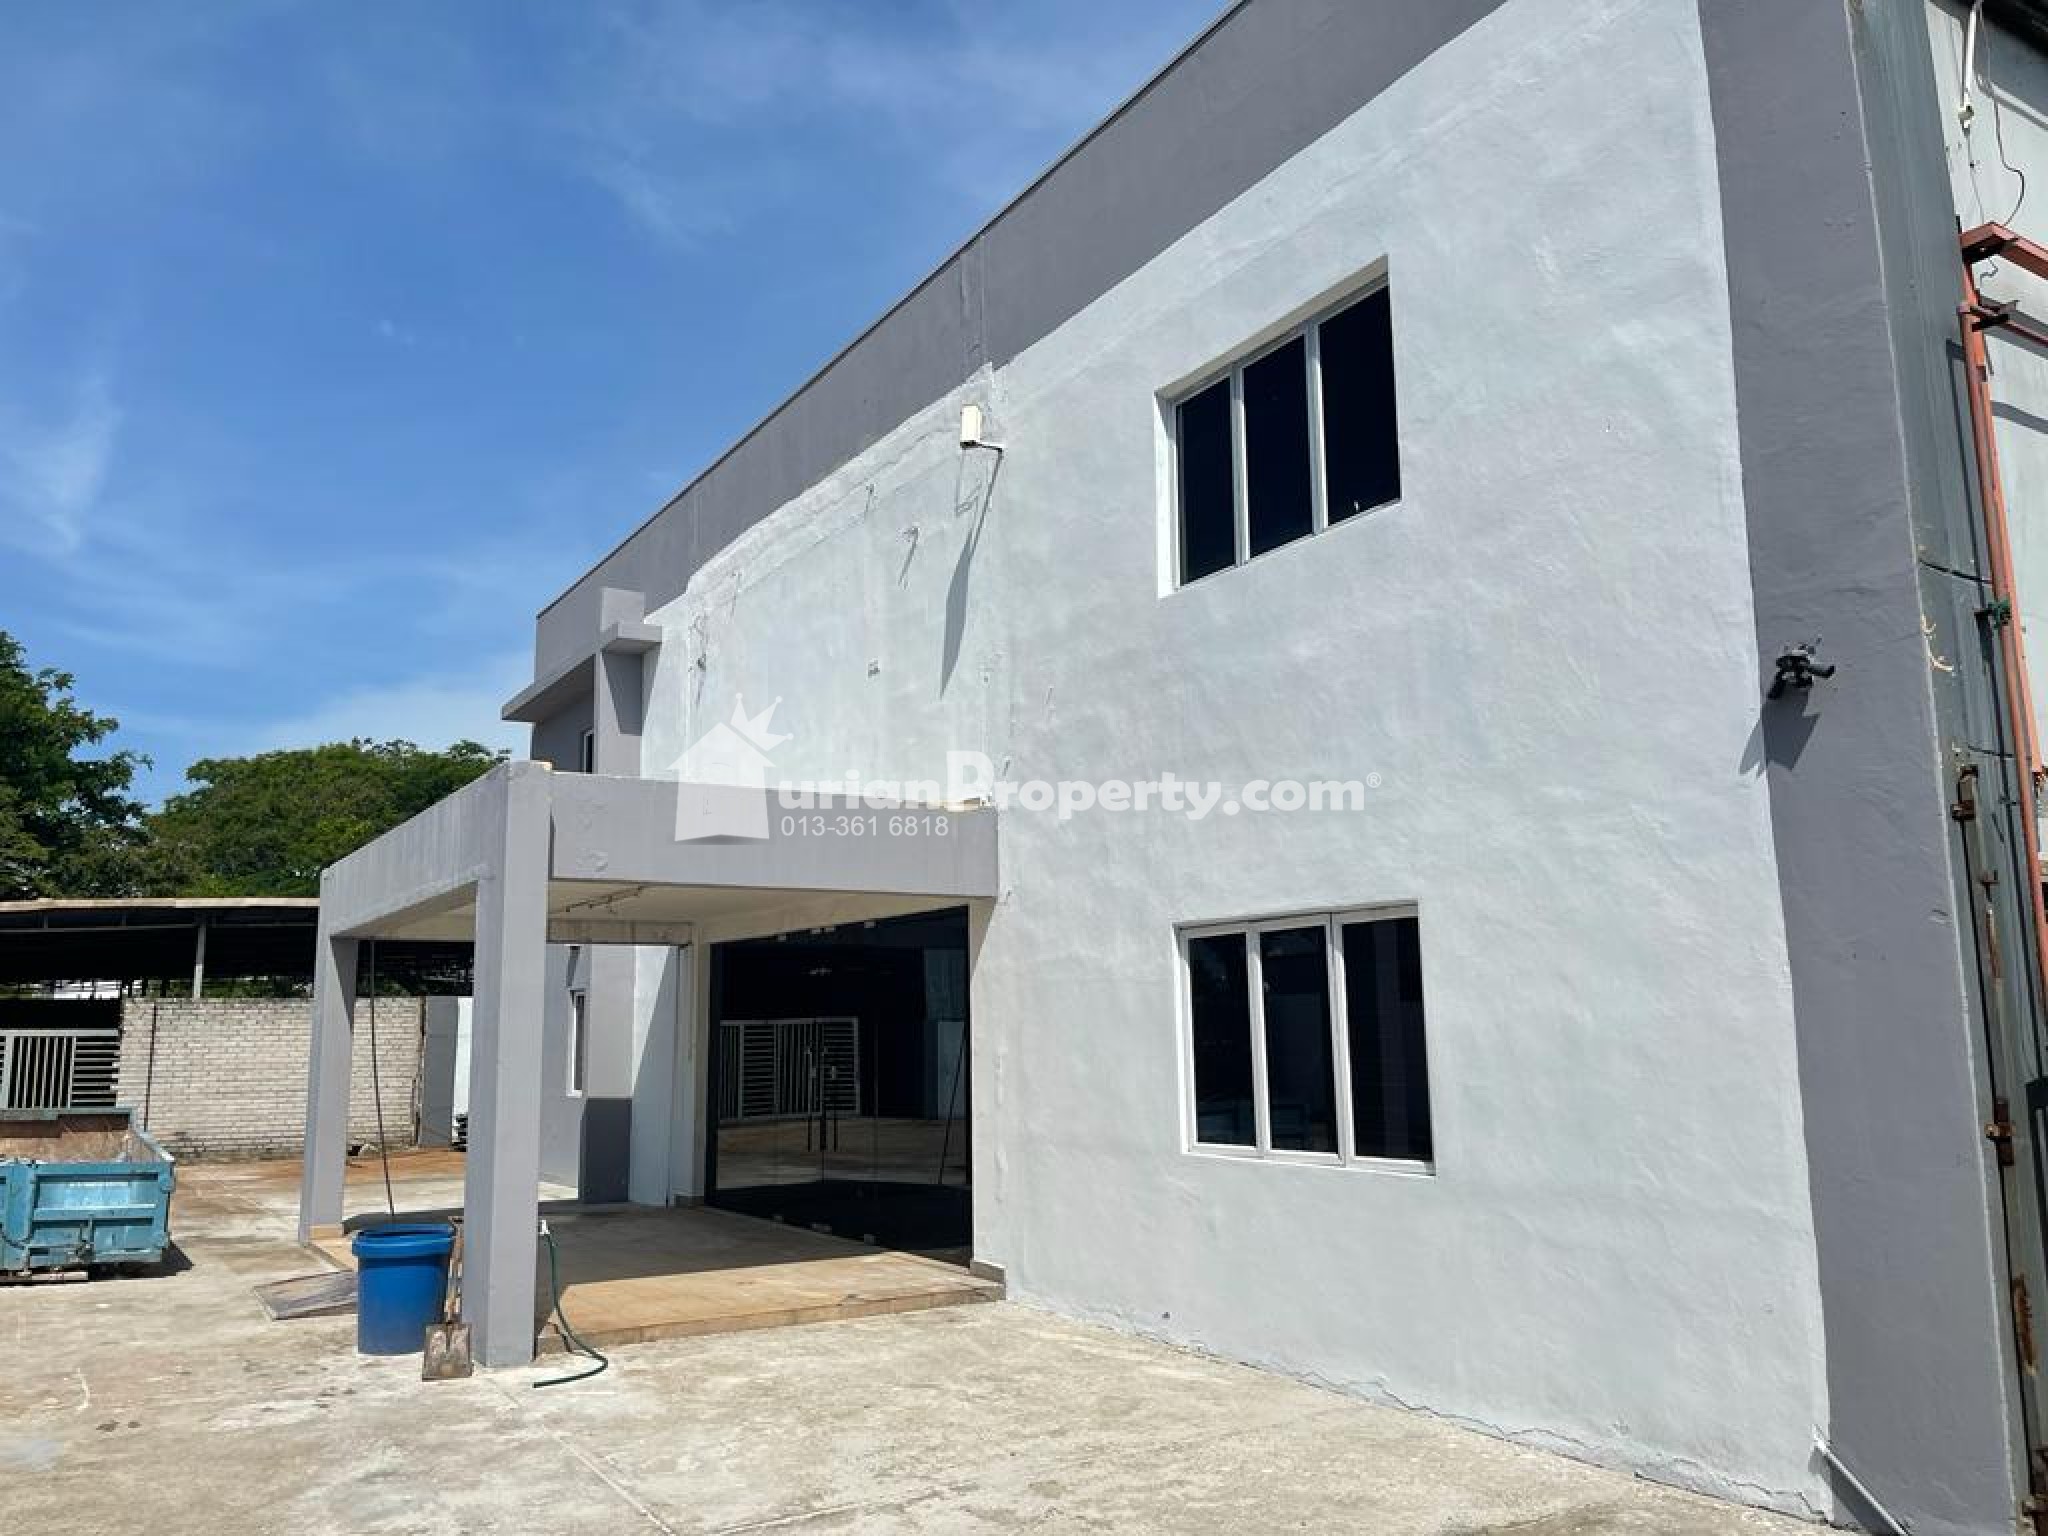 Detached Factory For Sale at Taman Perindustrian Puchong